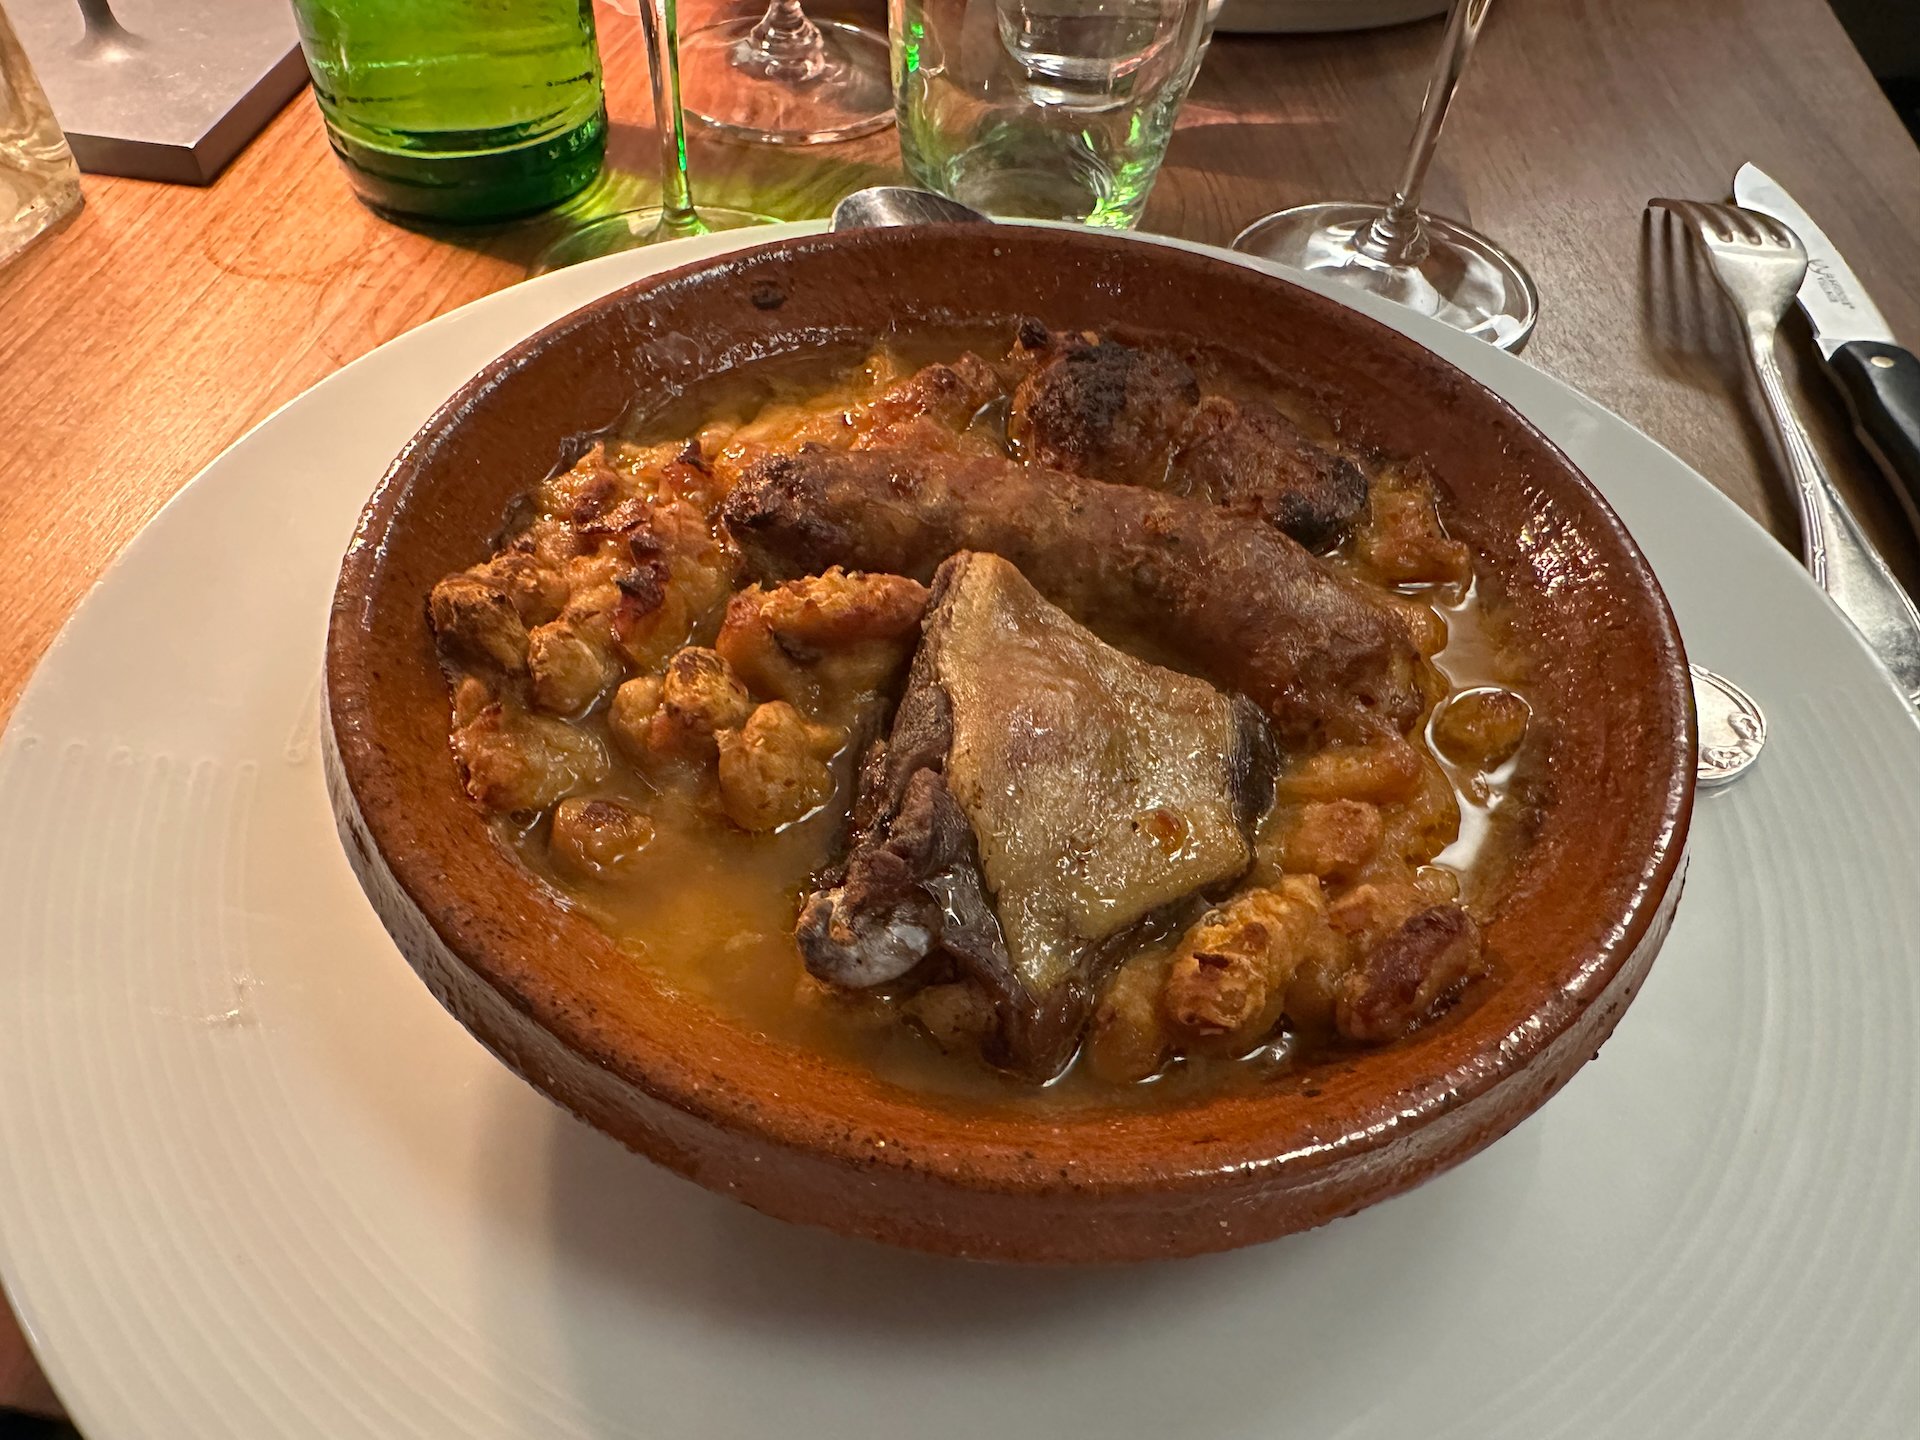  Cassoulet - some duck, some pork and a sausage, all in a whole pile of beans. It was hearty… I finally tried it - don’t expect that I will do so again.  